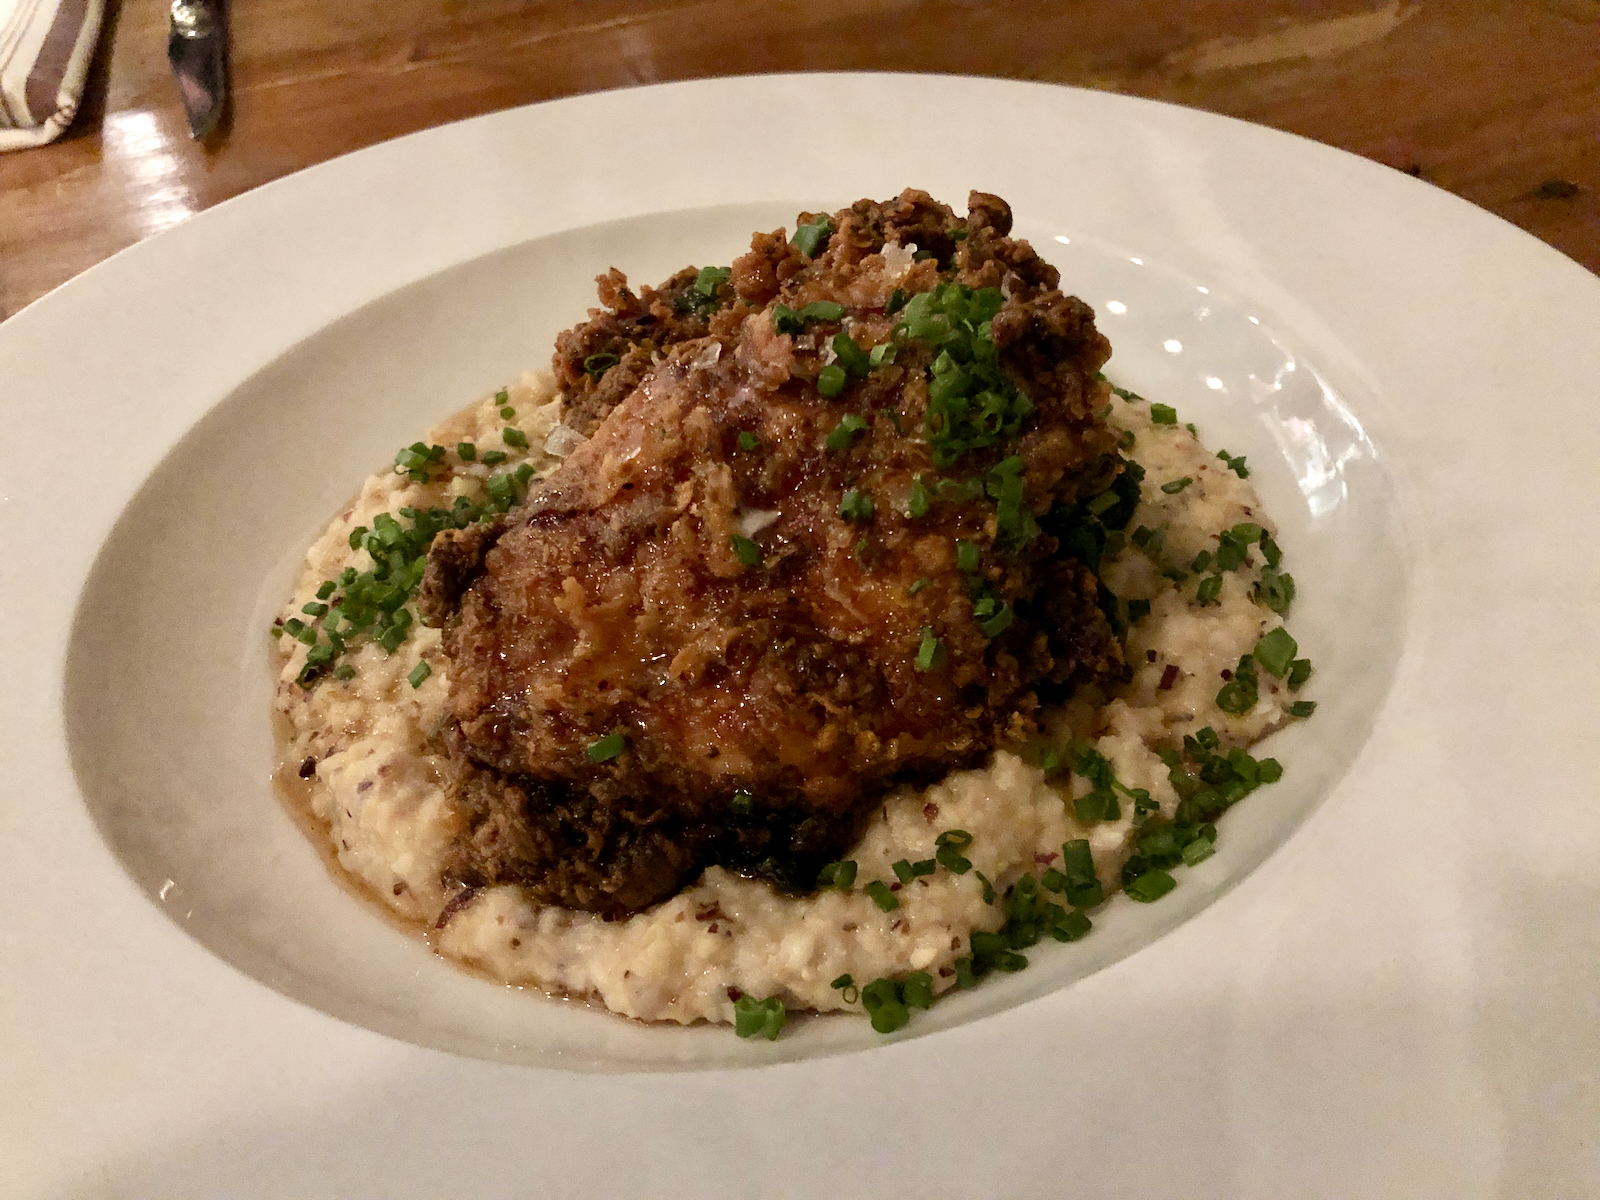 Fried chicken thigh and grits